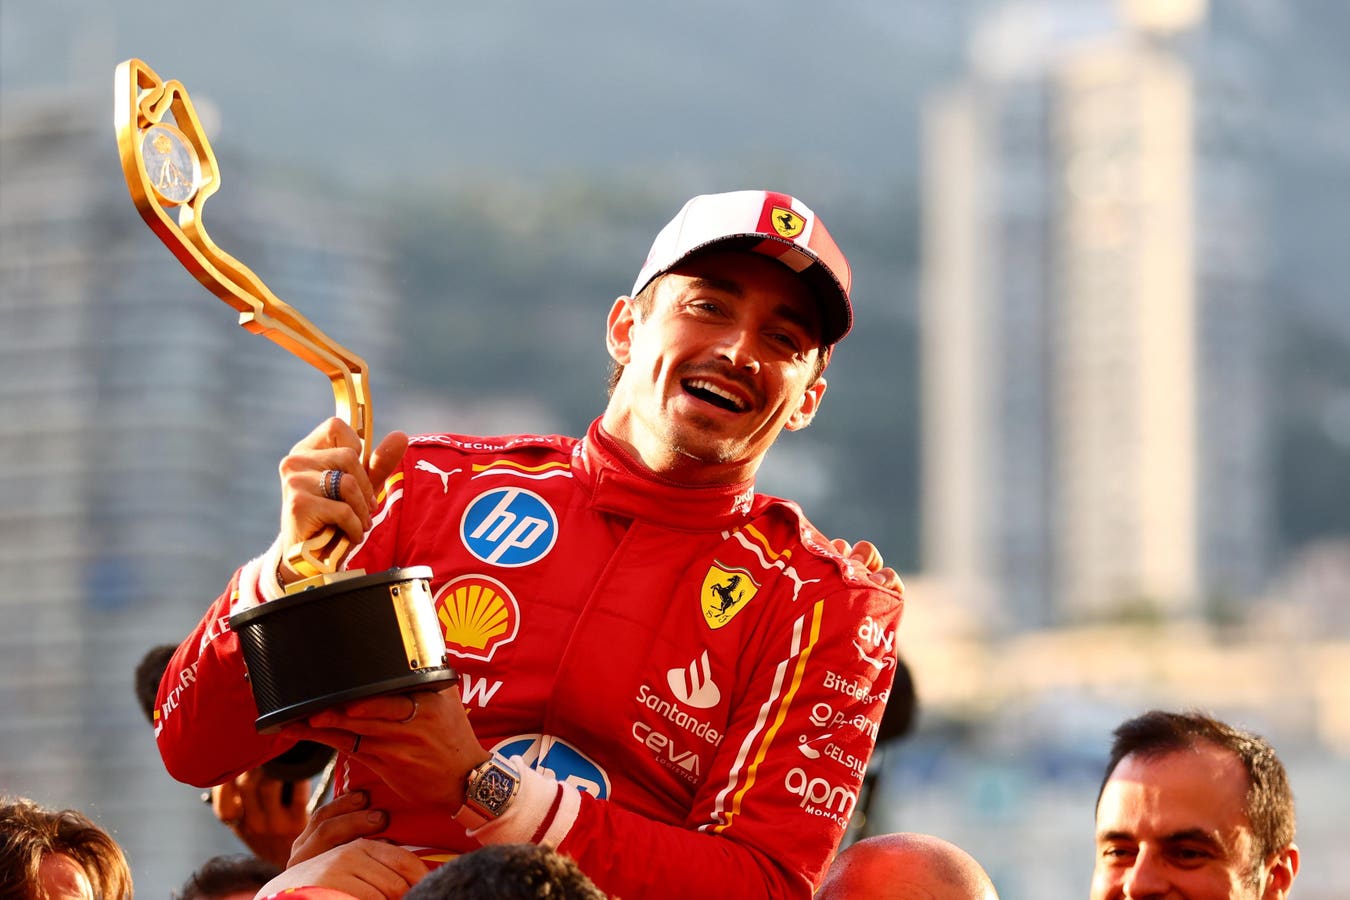 Charles Leclerc Claims Emotional Monaco GP Win But Drivers Want Change